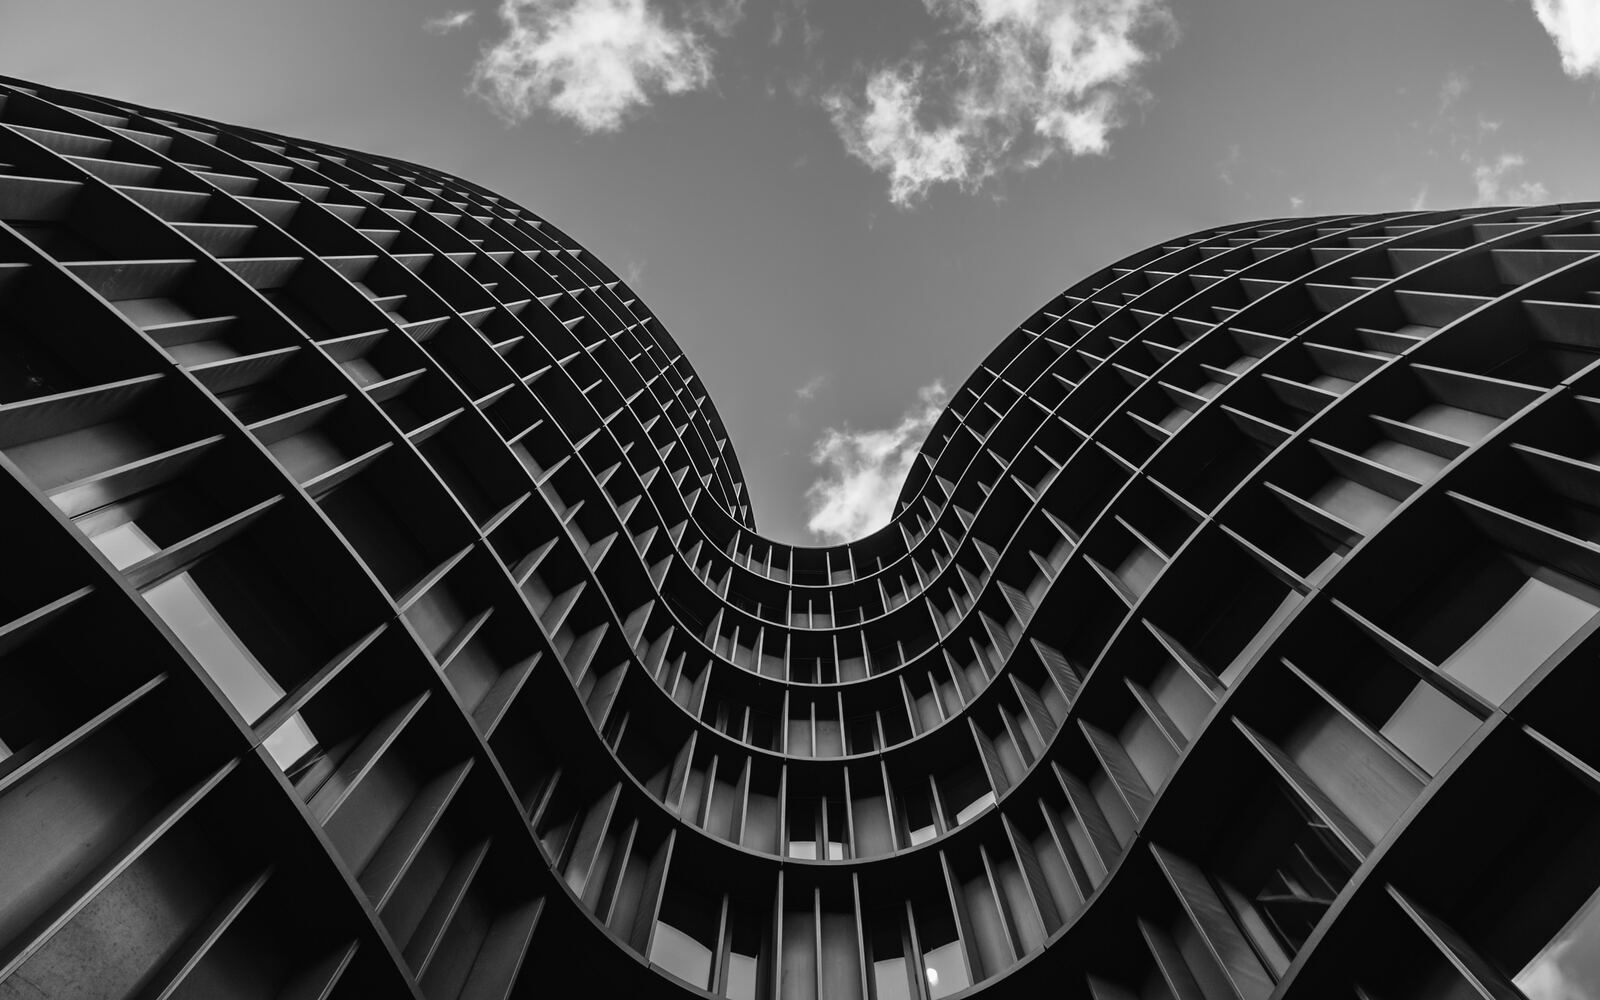 Image of Axel Towers by Team PhotoHound